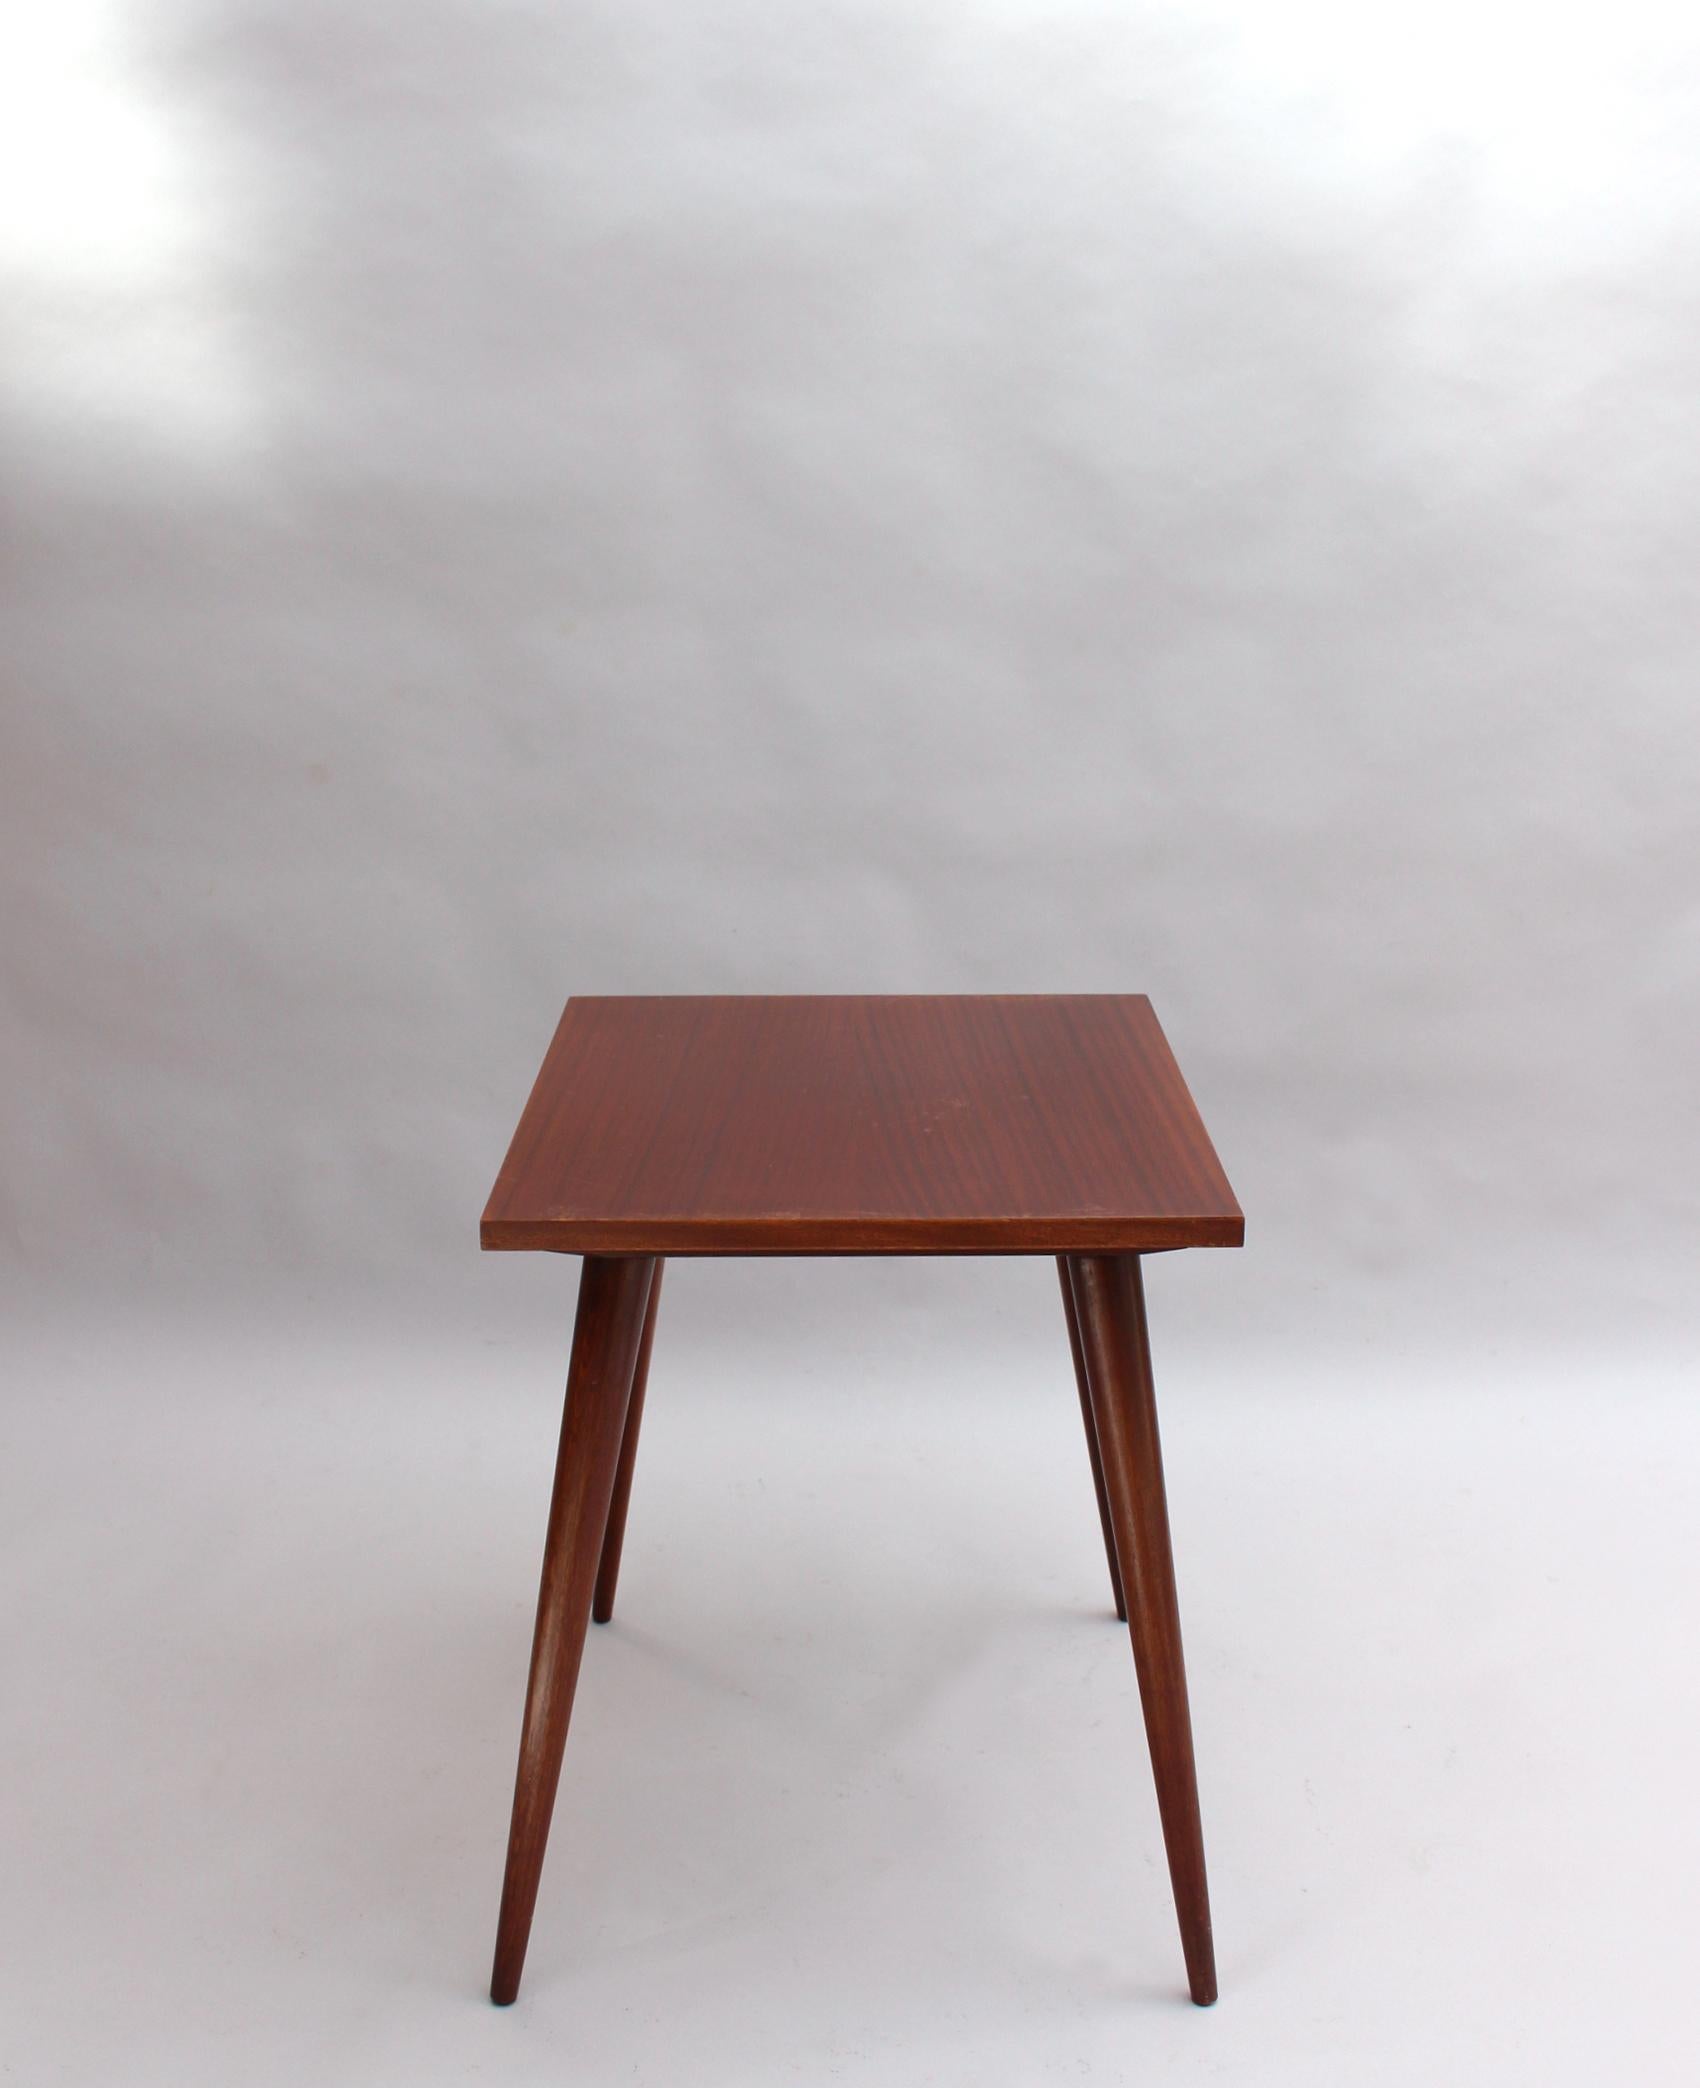 A fine French 1950s mahogany occasional table with a 4 compass leg base and a rectangular top.